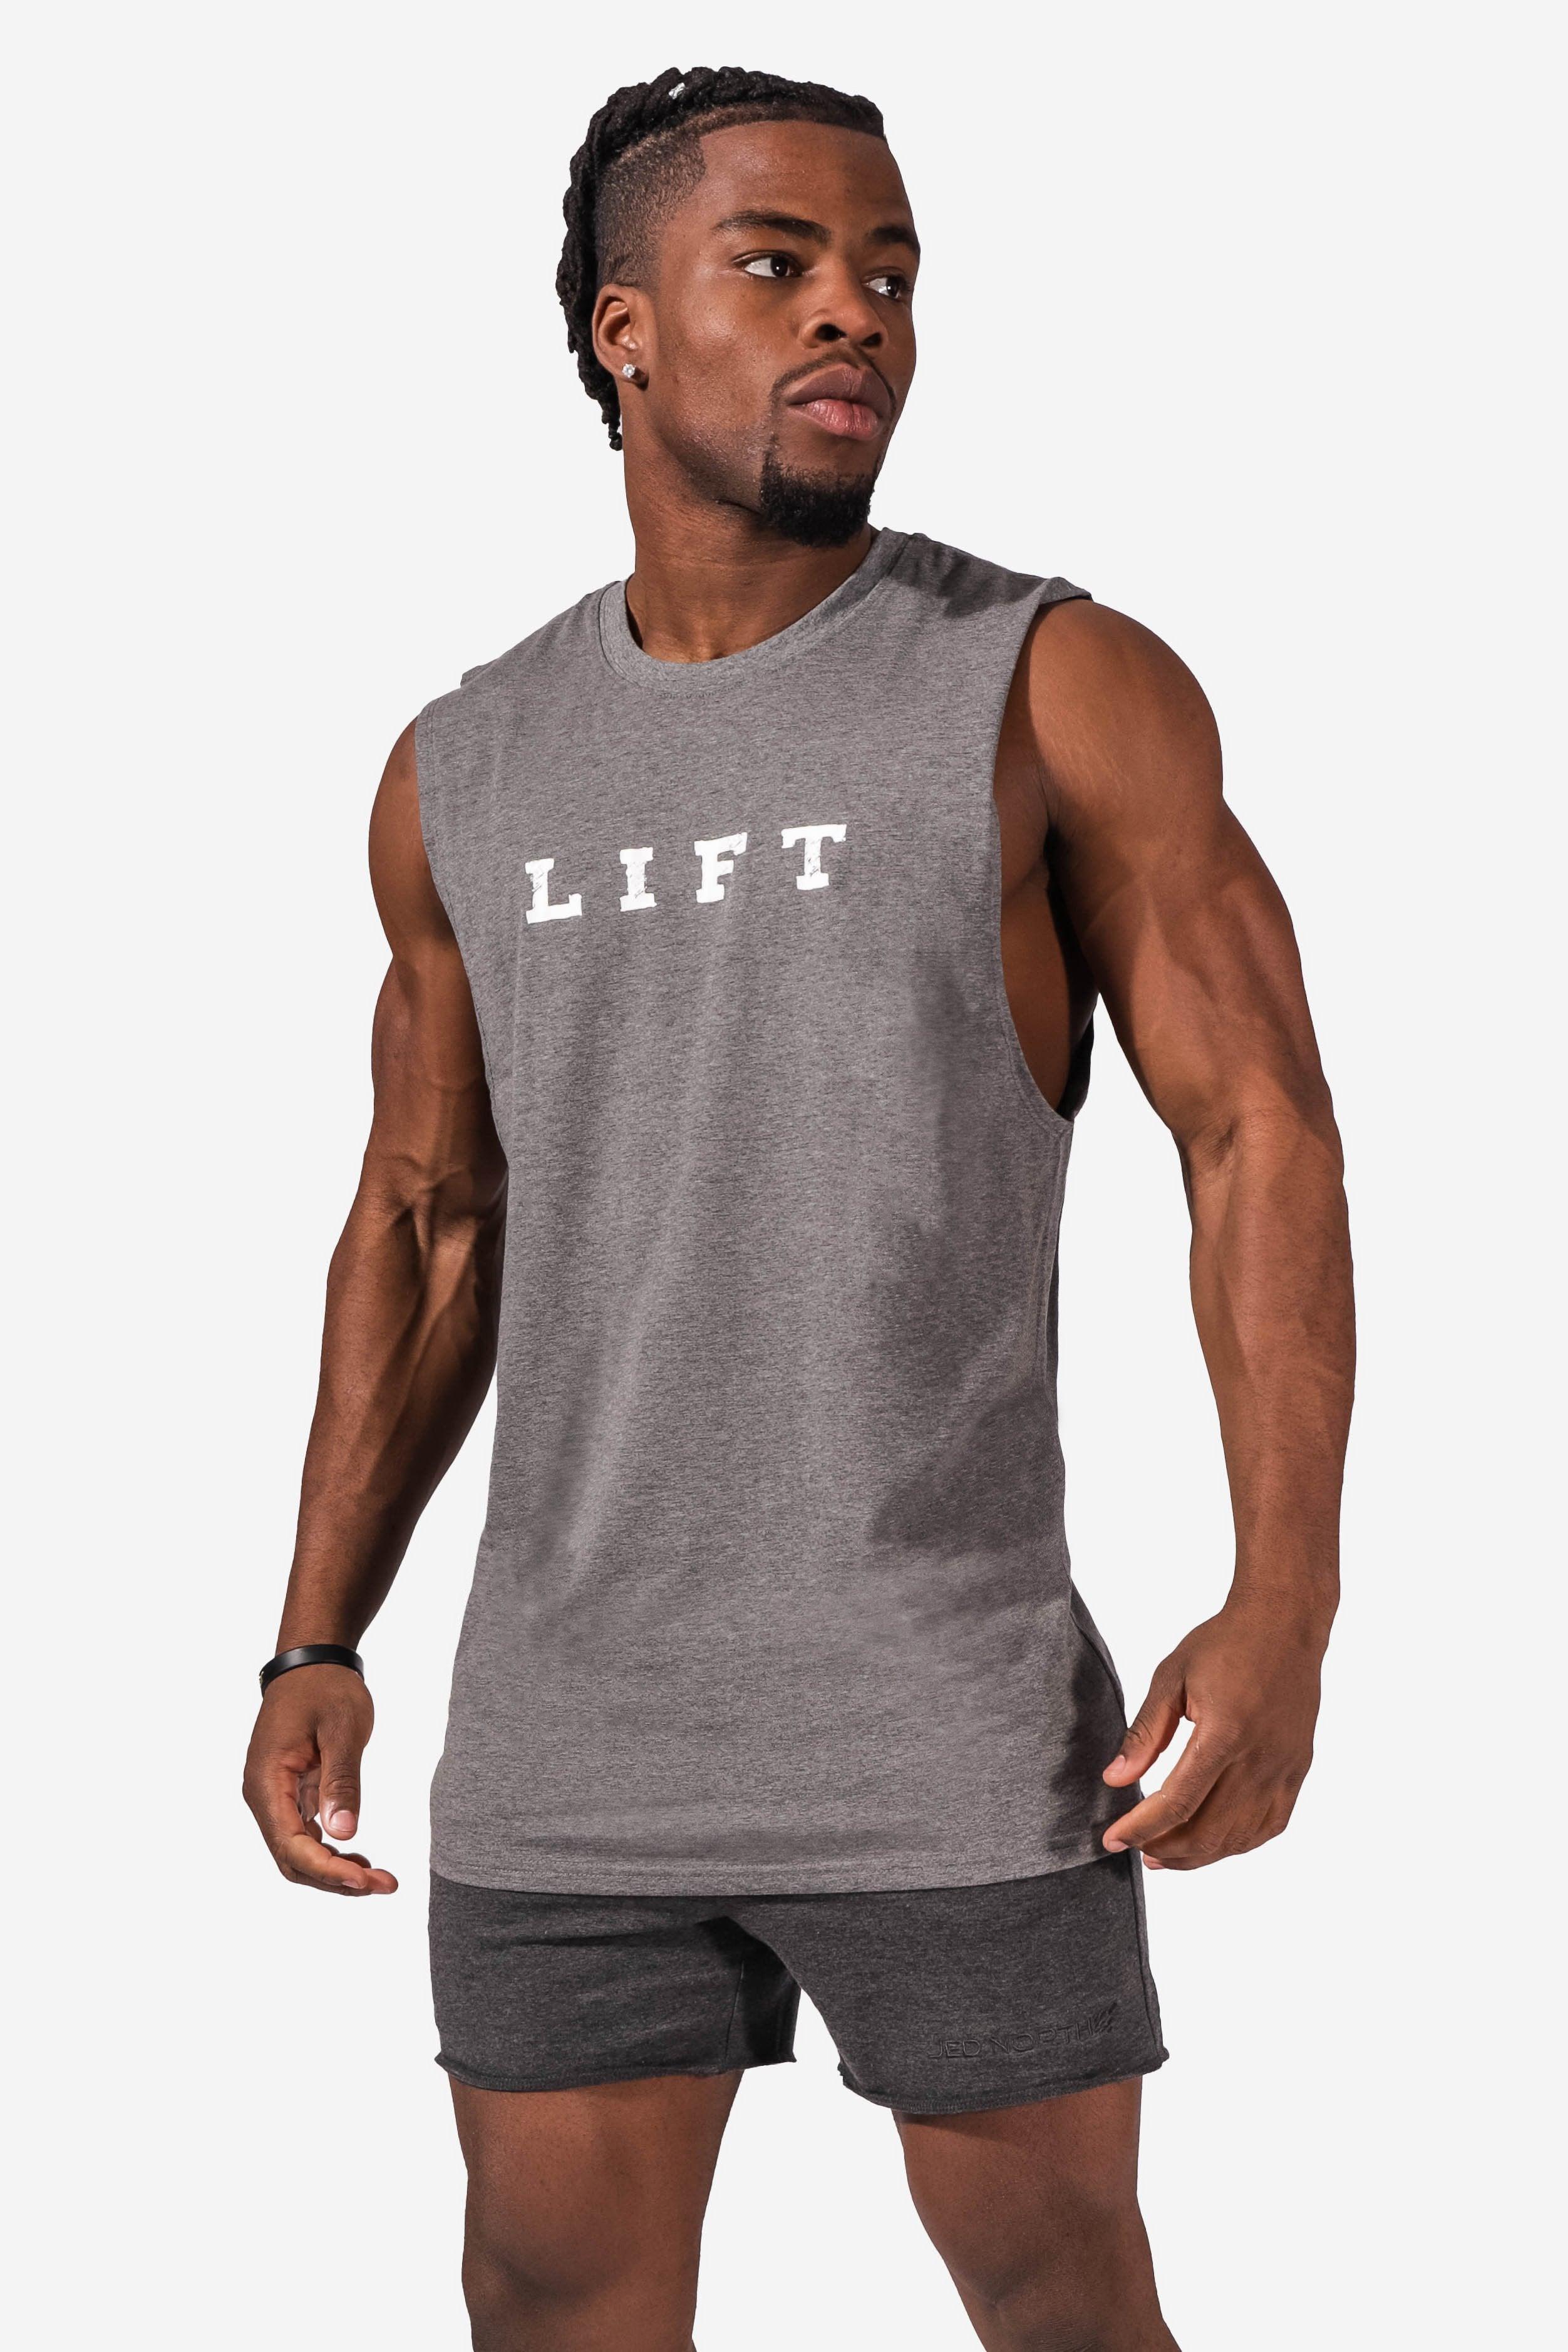 Just Gym Wear Muscle Guys Clothing Mens Loose Open Side Tank Tops